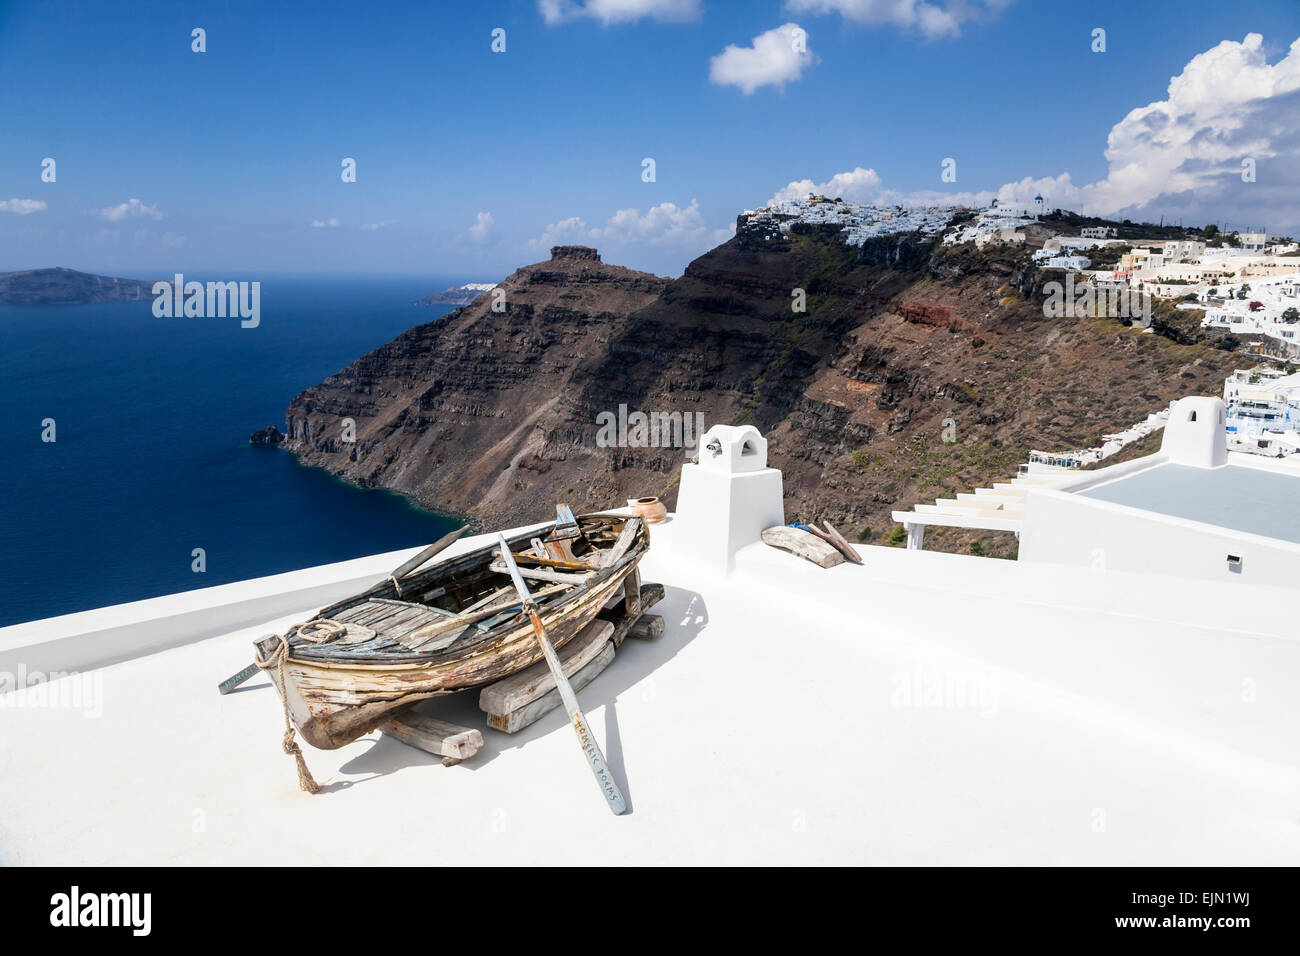 Old row boat on the roof of a building over looking the caldera, Firostefani, Santorini (Thera), Greece Stock Photo